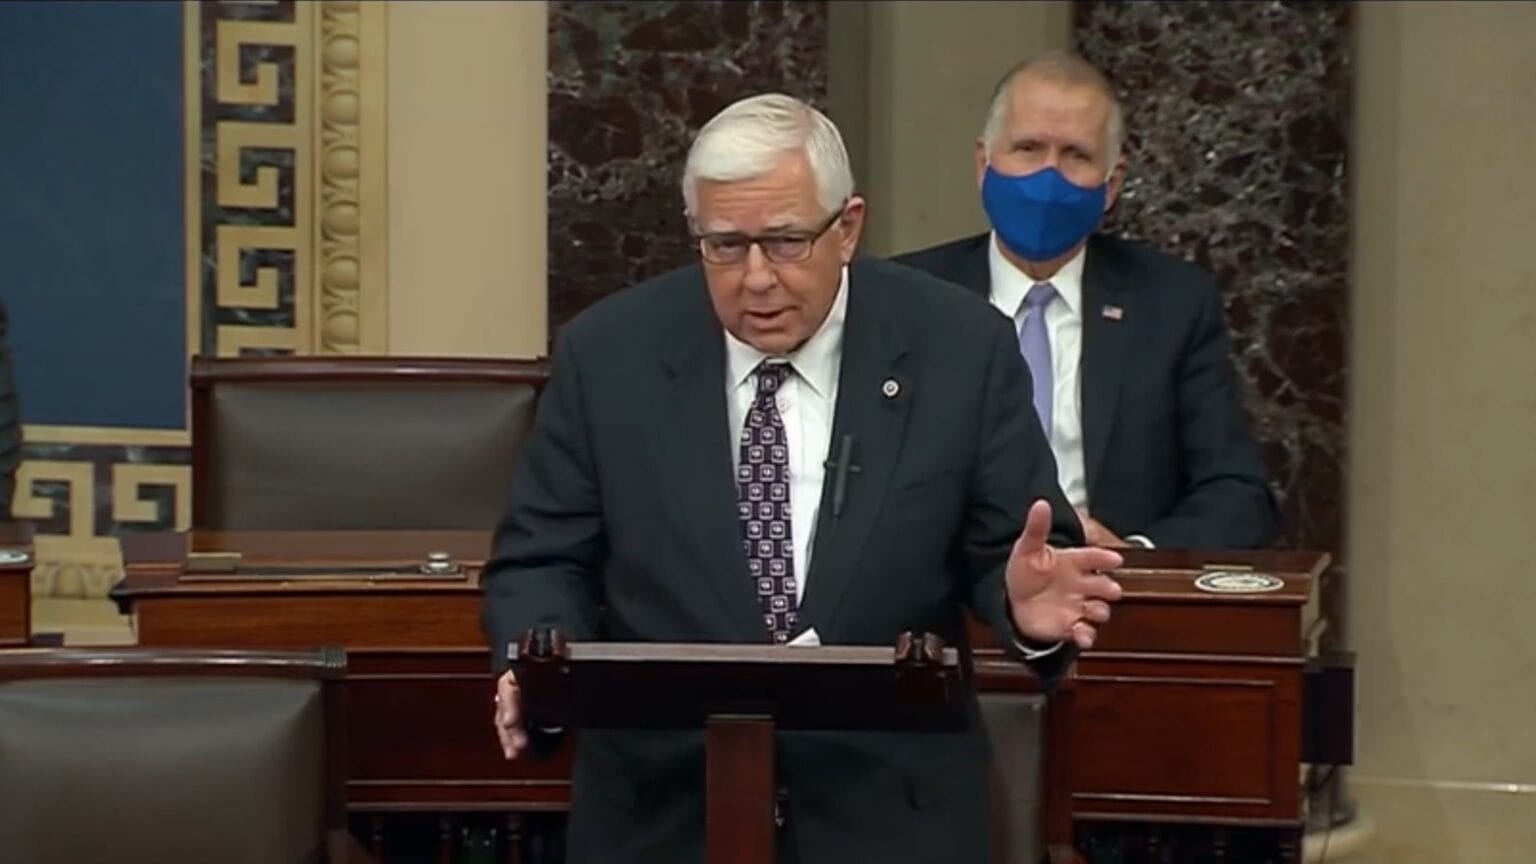 Senator Michael B Enzi says iPads and other electronic devices should be allowed on the Senate floor.